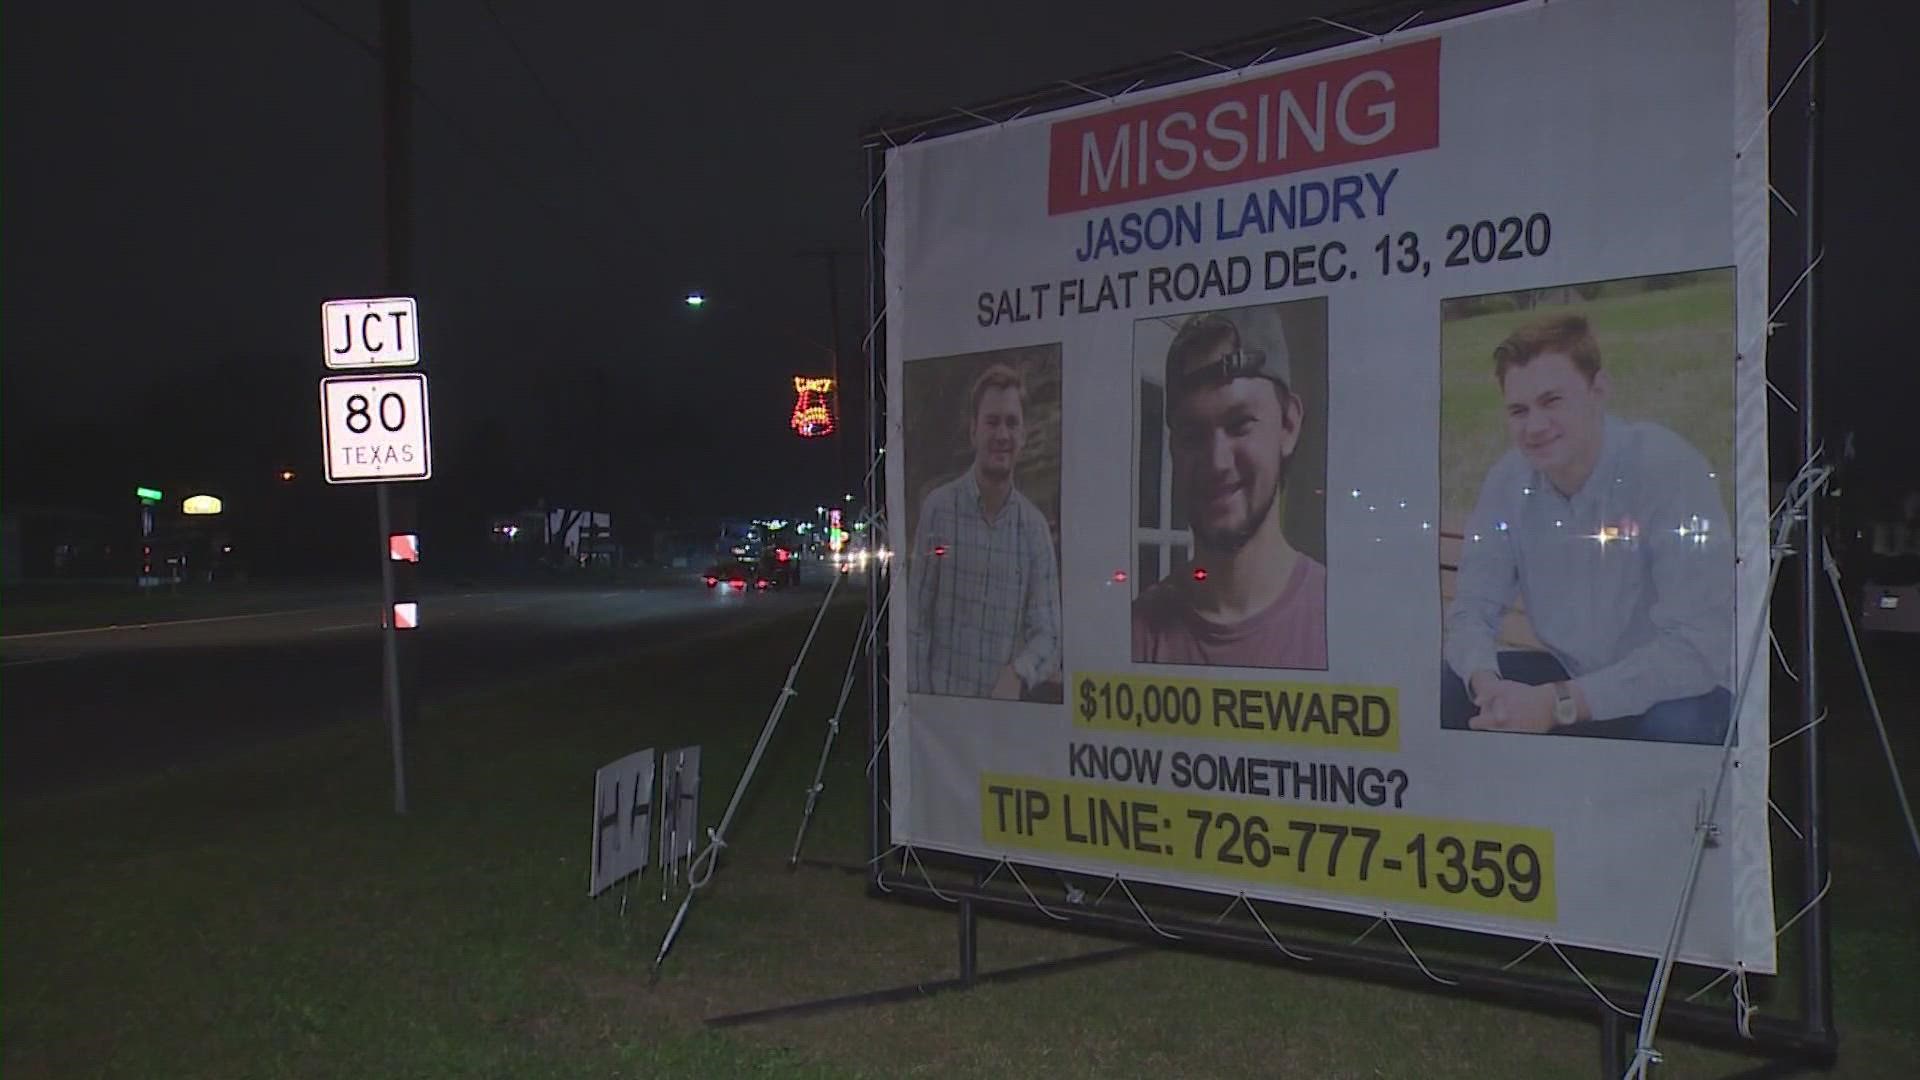 Jason Landry was last seen on Dec. 13, 2020. He was supposed to be headed to Missouri City from Texas State University, but he never made it home.